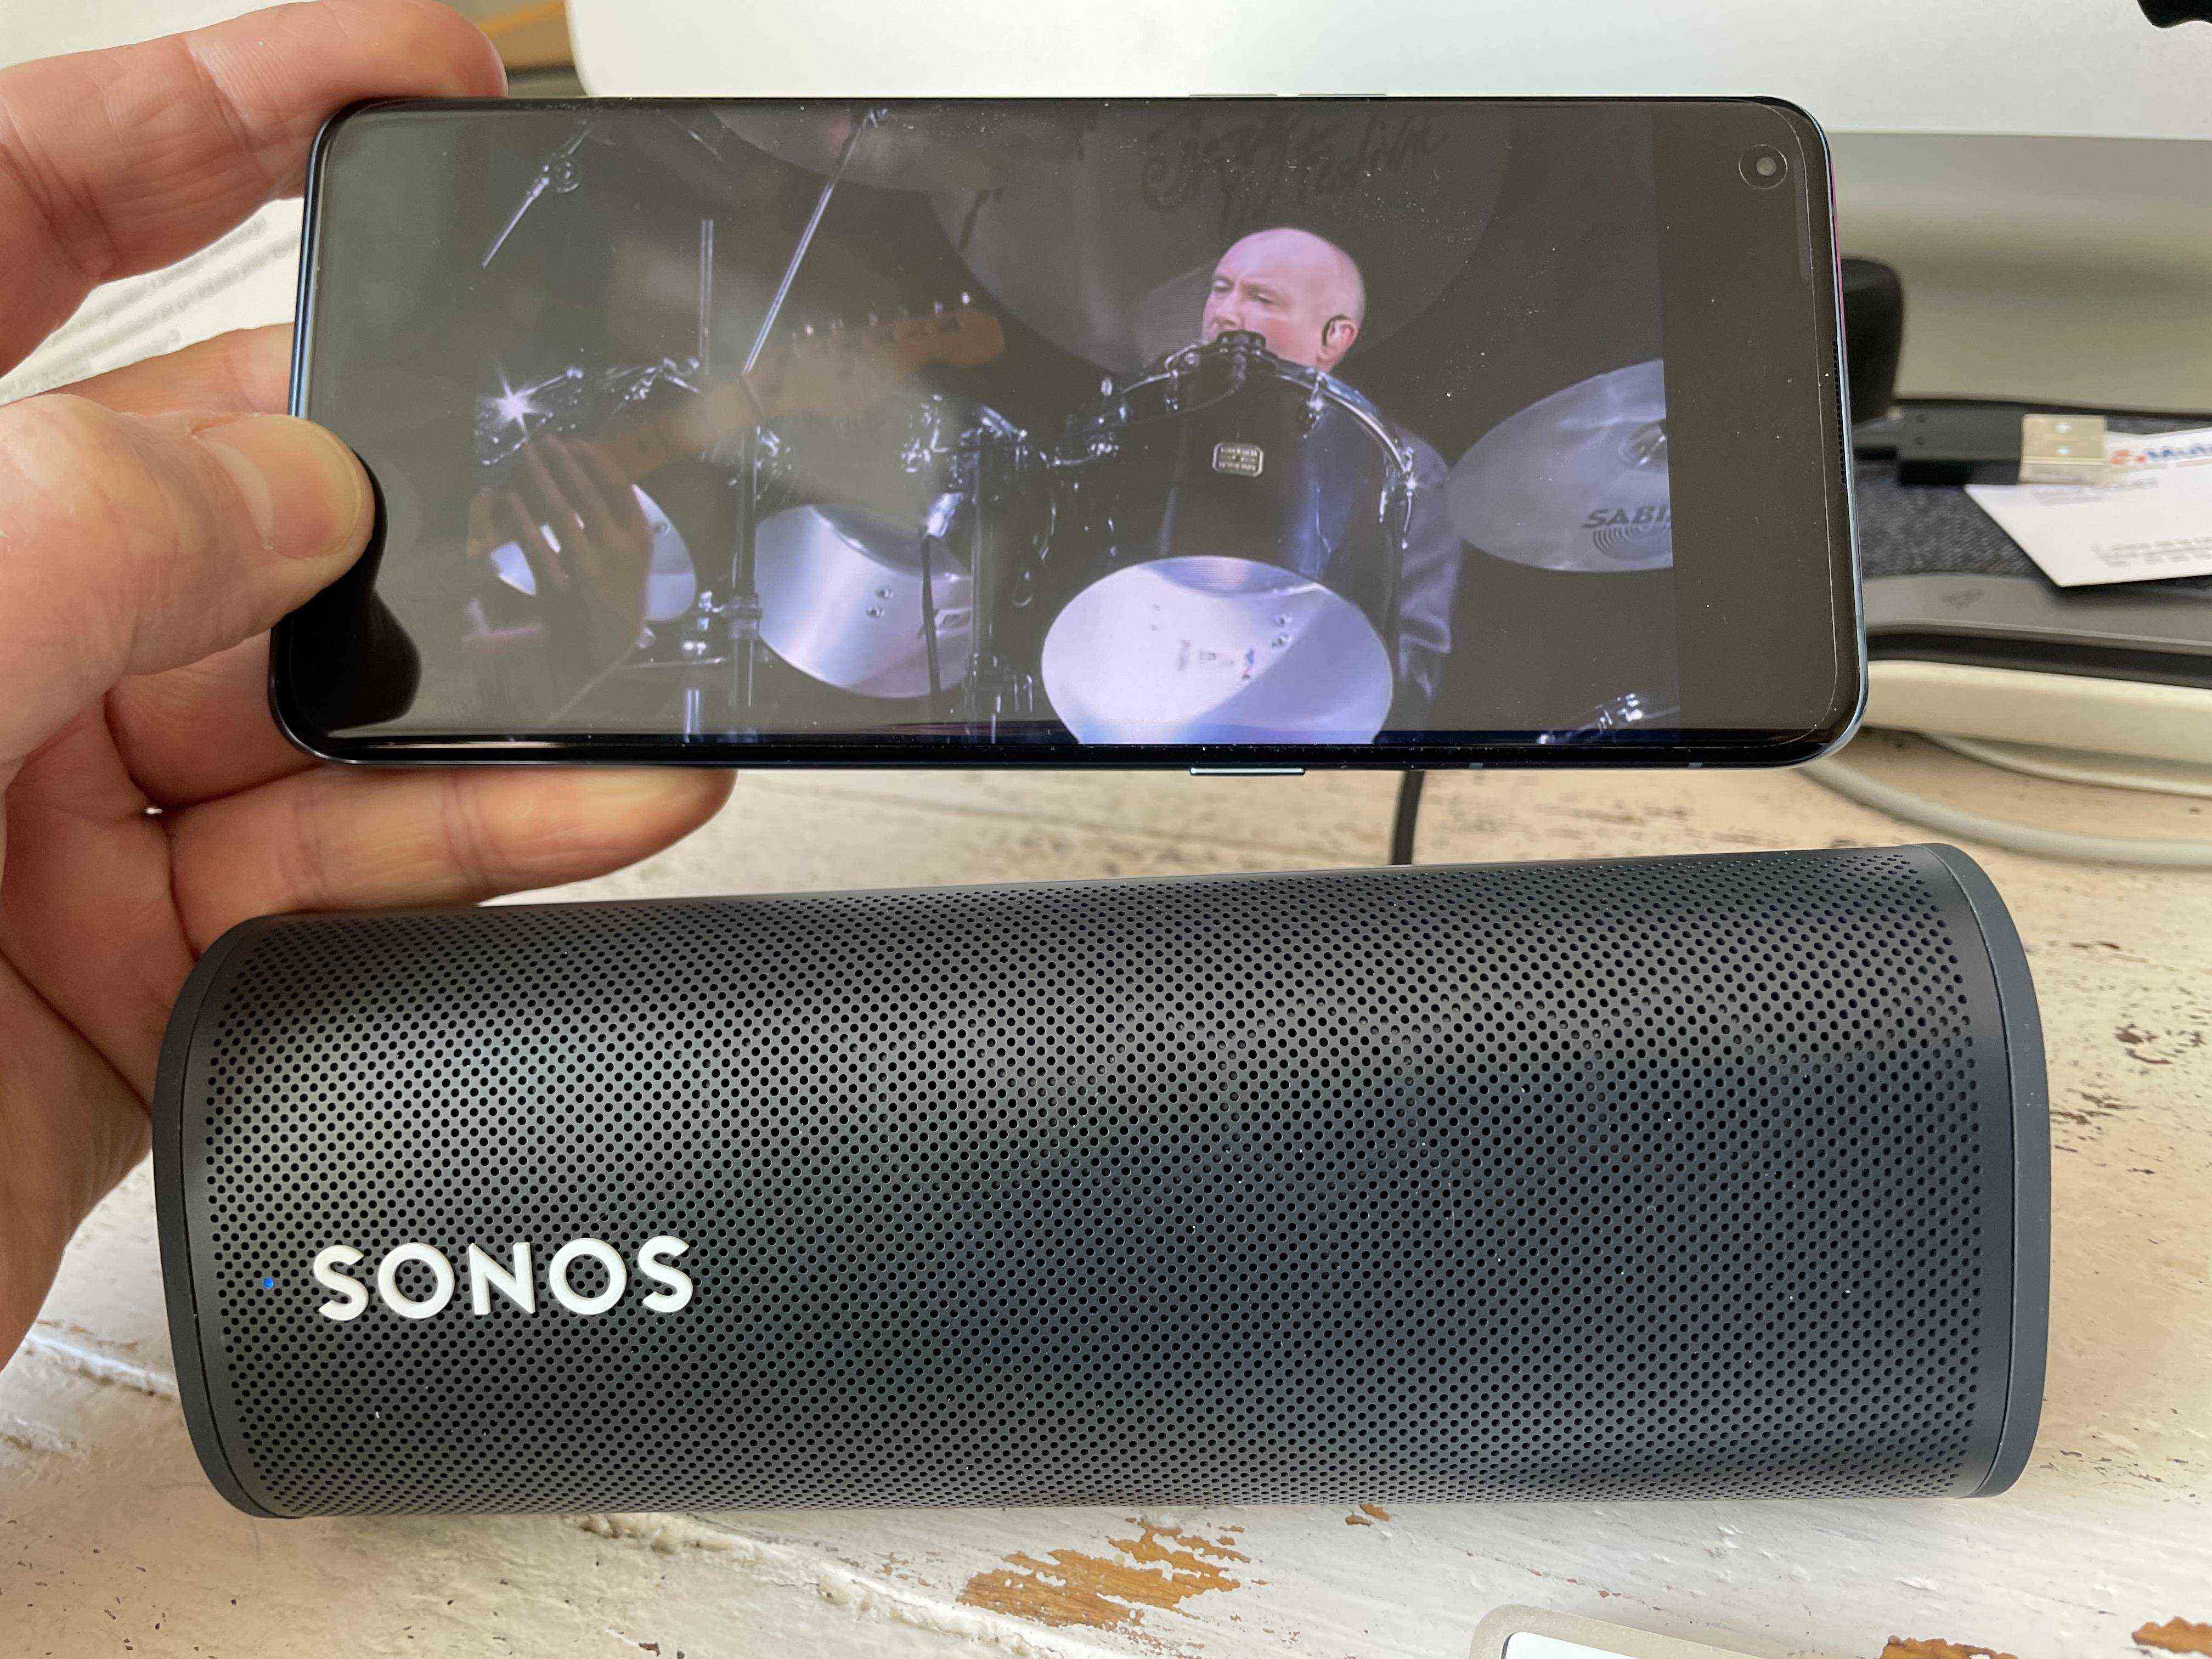 Roam, used as a soundbar for smartphone and enjoy the concert of Phil Collins in Montreux.